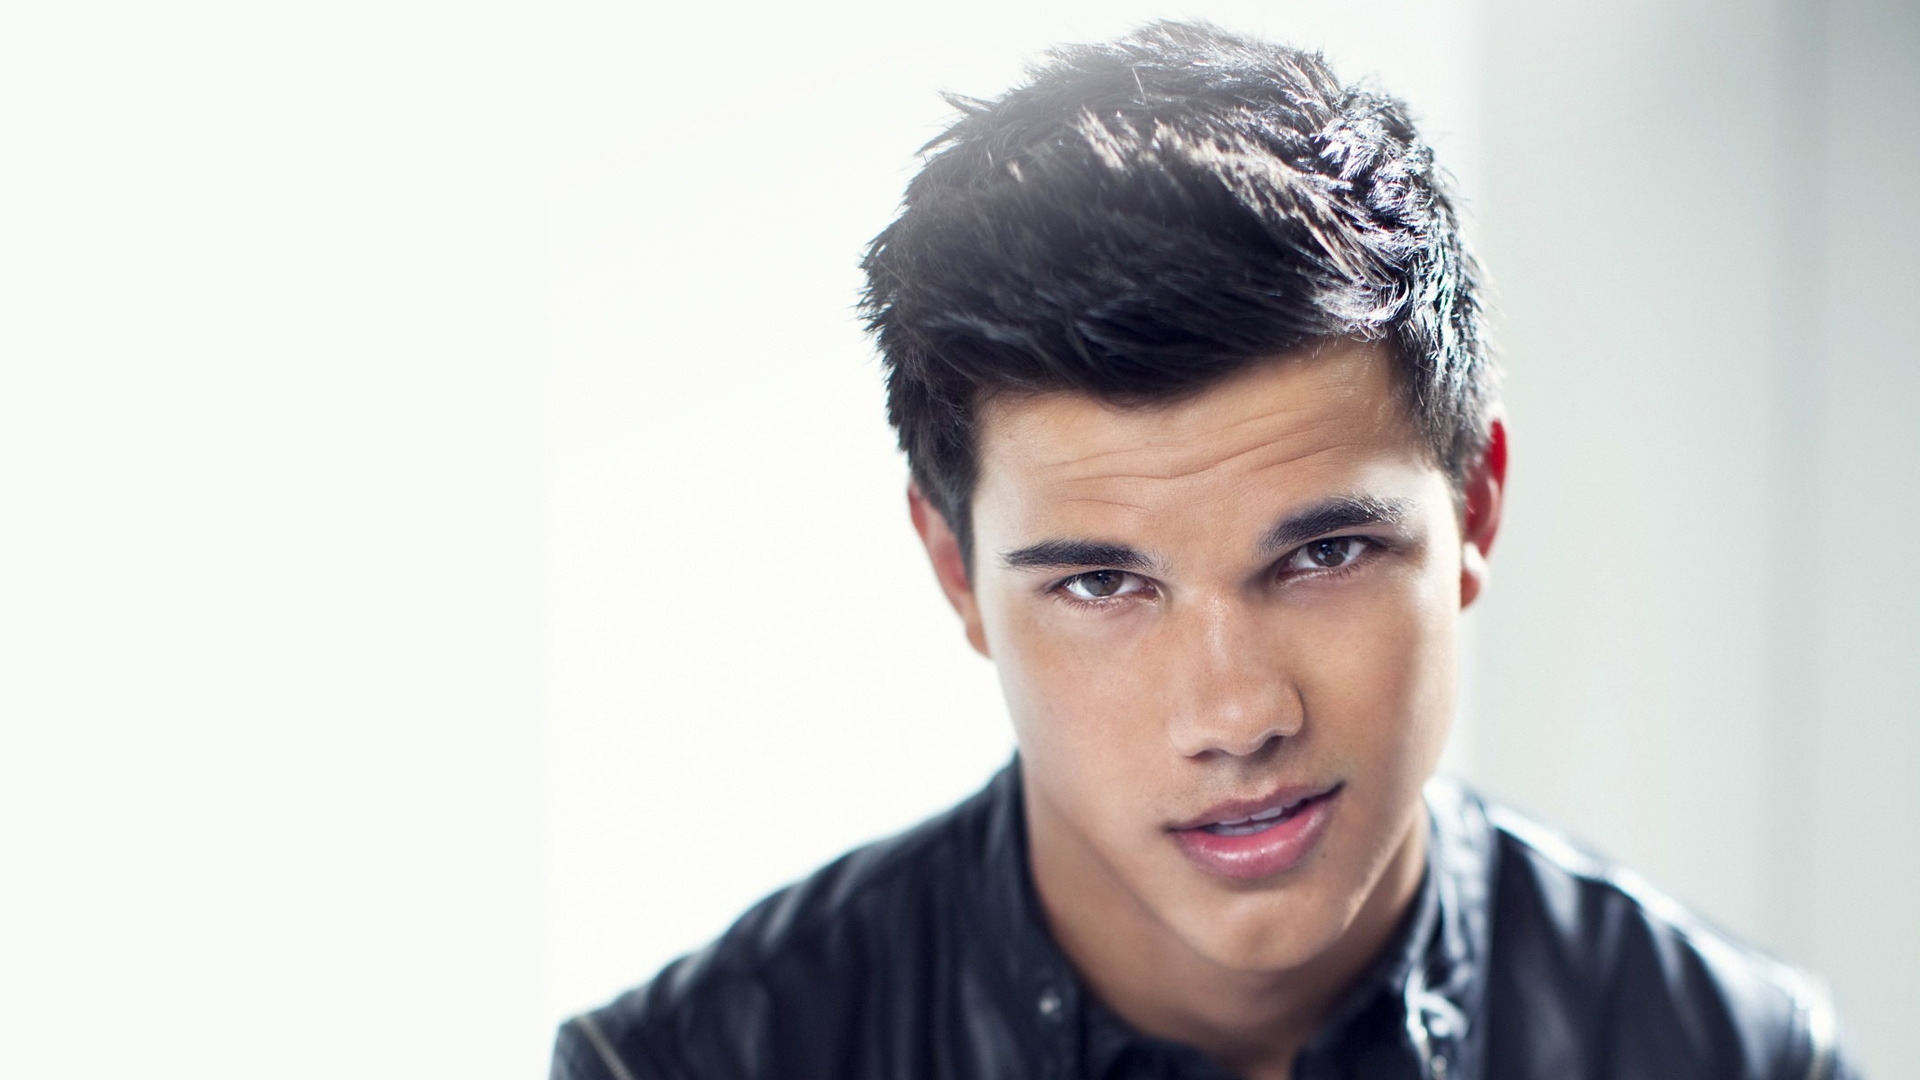 Taylor Lautner Look for 1920 x 1080 HDTV 1080p resolution